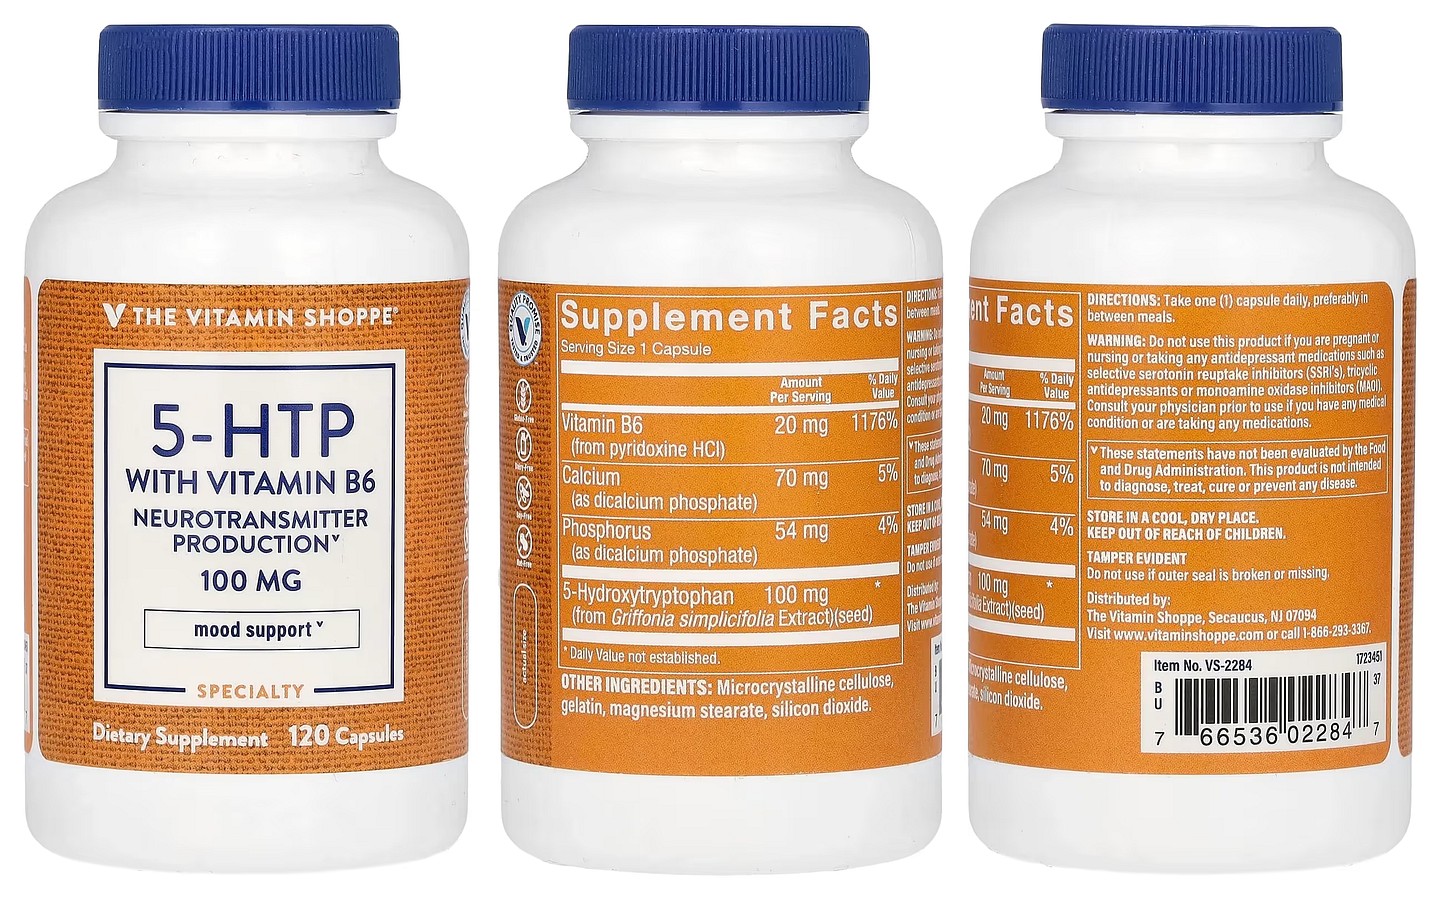 The Vitamin Shoppe, 5-HTP With Vitamin B6 packaging